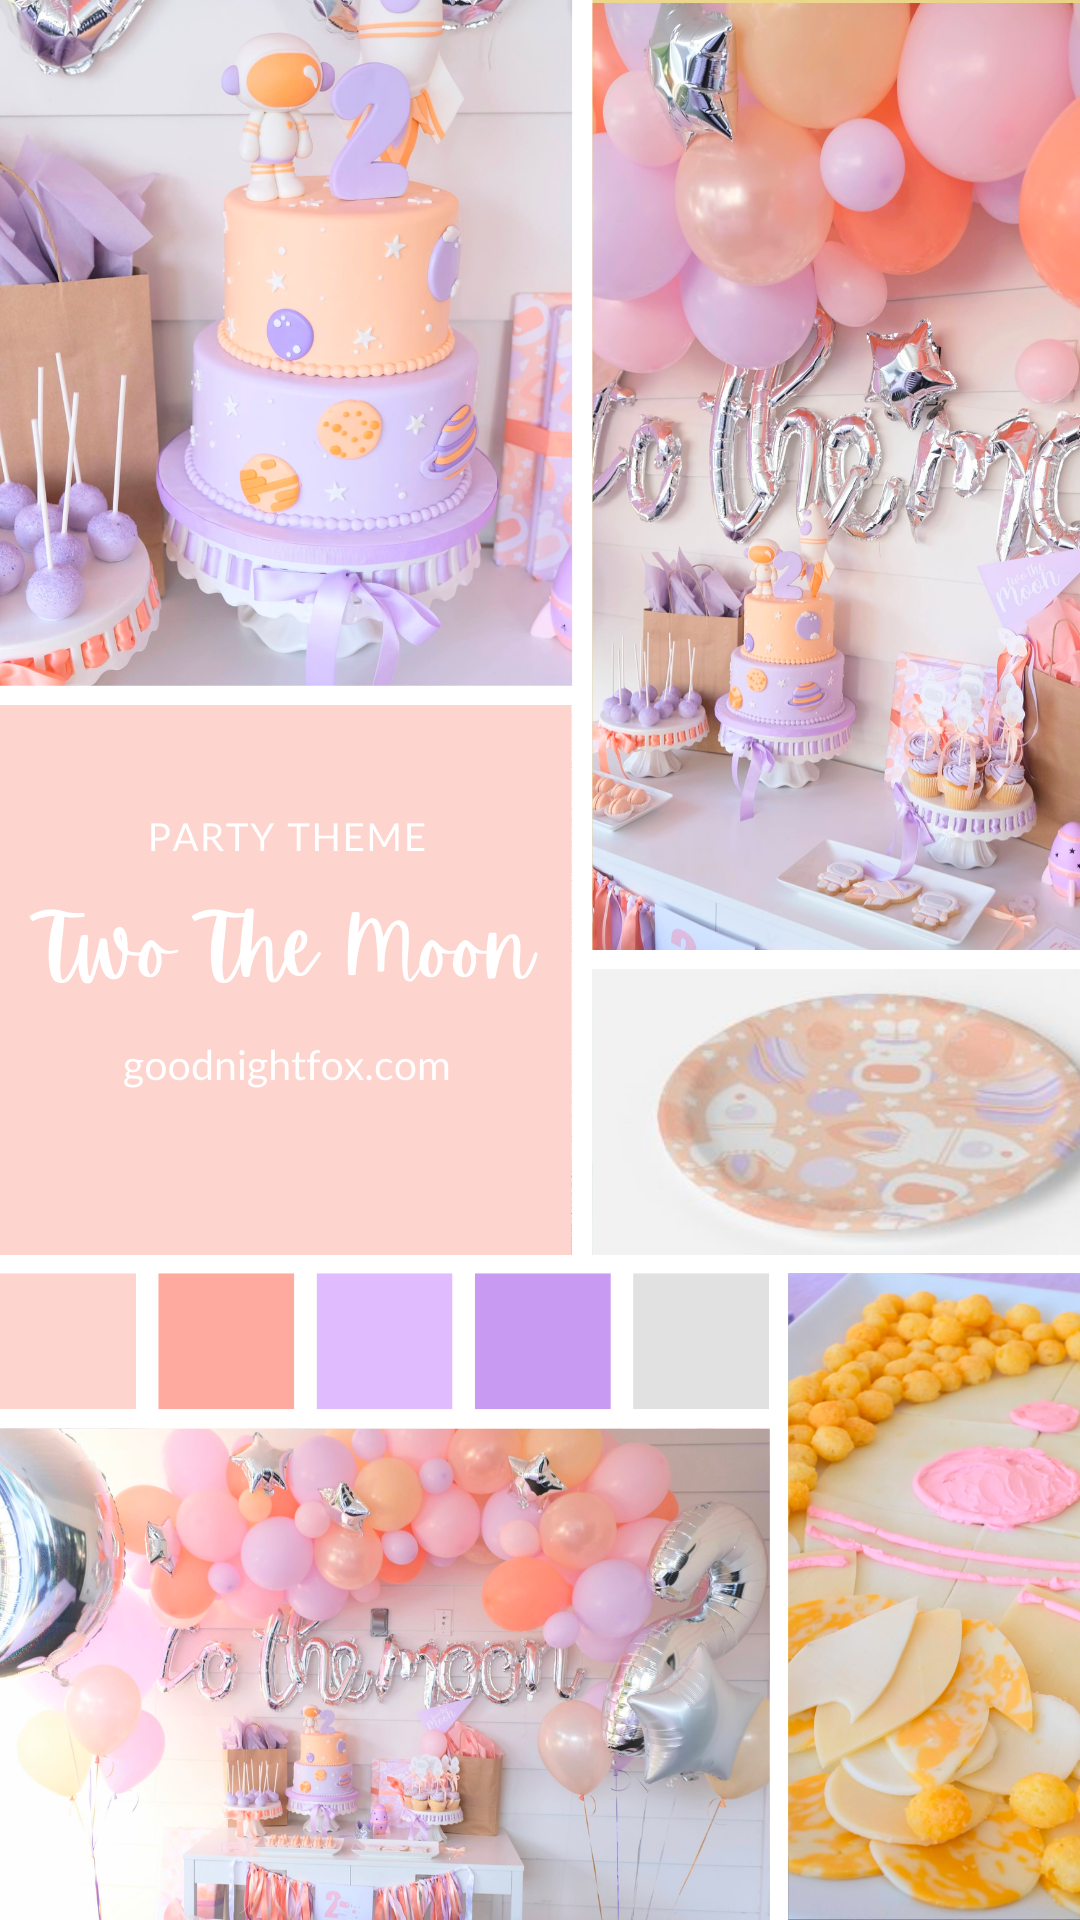 The Birthday Girl Party updated - The Birthday Girl Party